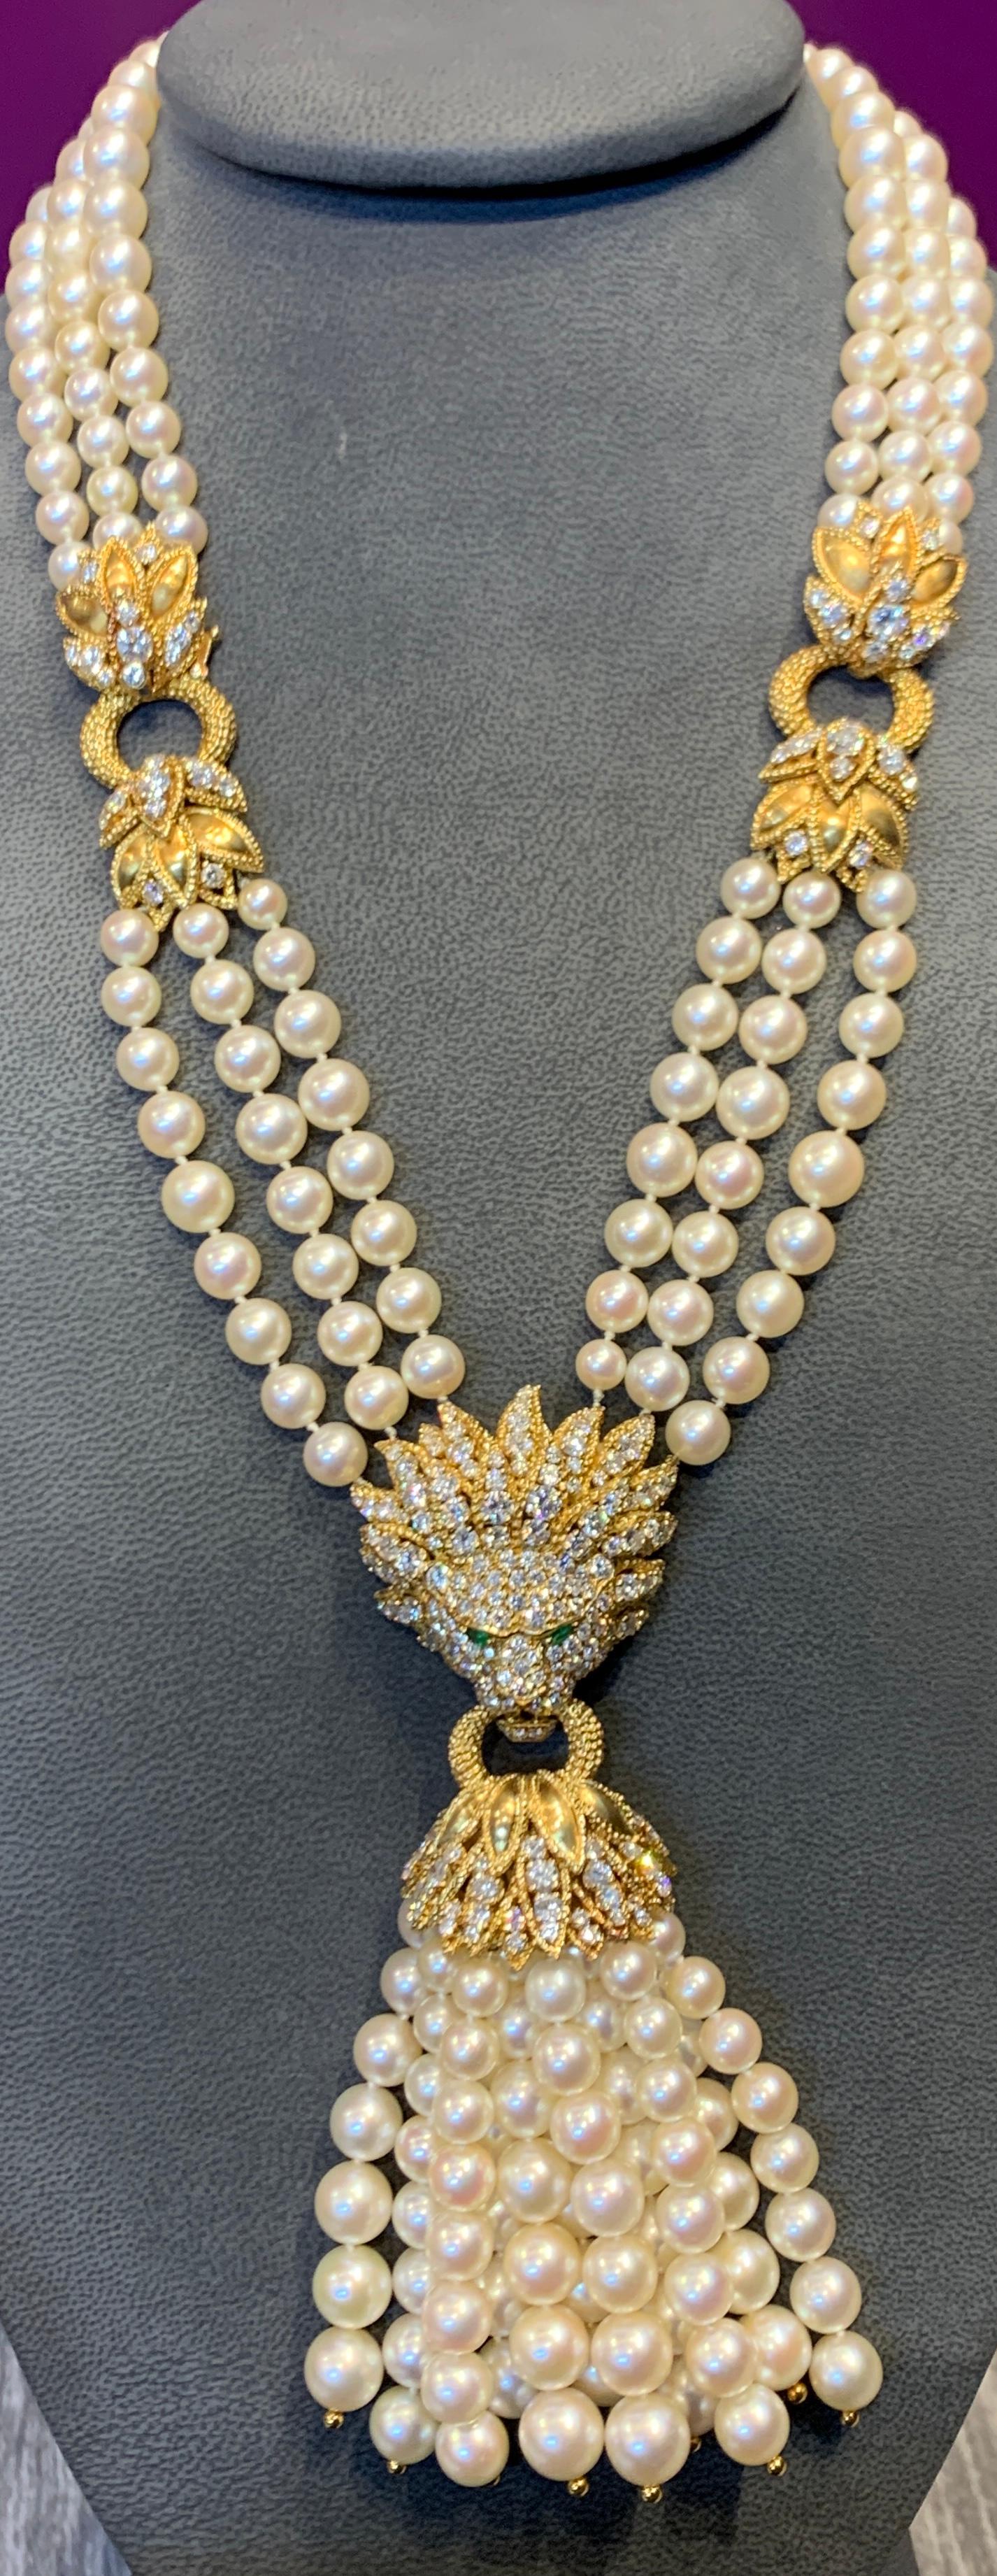 Van Cleef & Arpels Pearl & Diamond Lion Necklace, Earrings & Ring Set, 18K Yellow Gold.

A Cultured Pearl tassel necklace with pearls measuring 8.7 to 6.2 mm including diamond & textured gold links of foliate motif, with 11 tassels of cultured